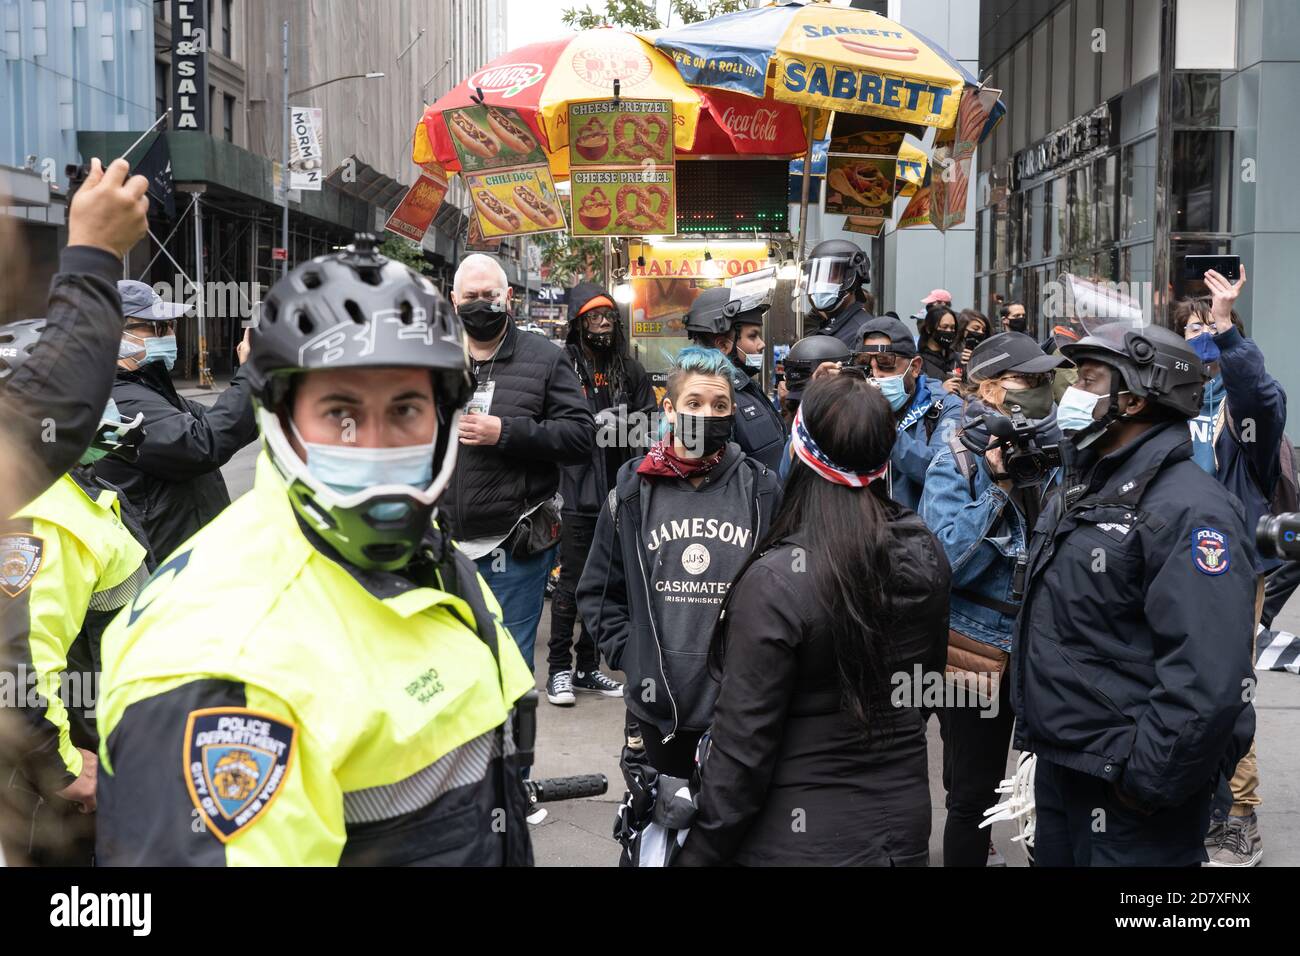 NEW YORK, NY – OCTOBER 25: Anti-Trump and Pro-Trump protesters talk as police watch over in Times Square on October 25, 2020 in New York City. Stock Photo